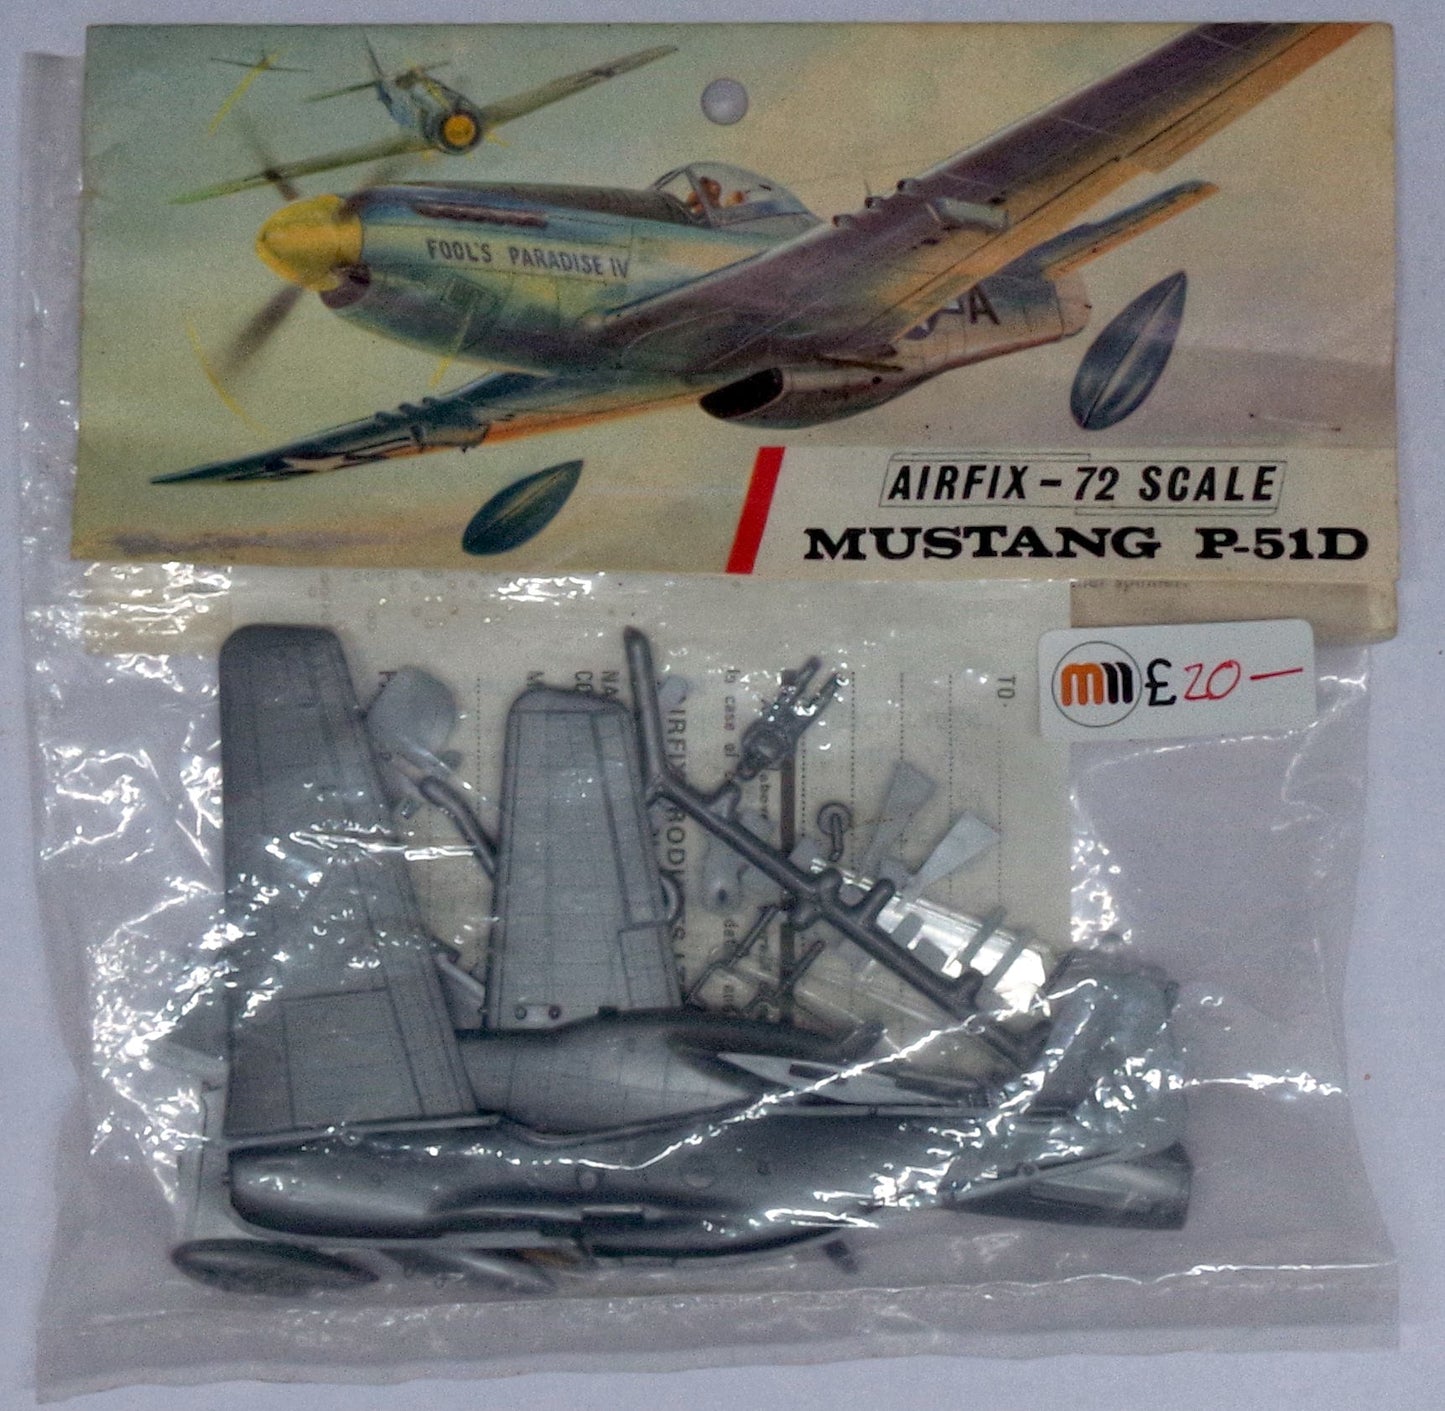 Collectors: Airfix 1/72nd scale Bagged Mustang P-51D